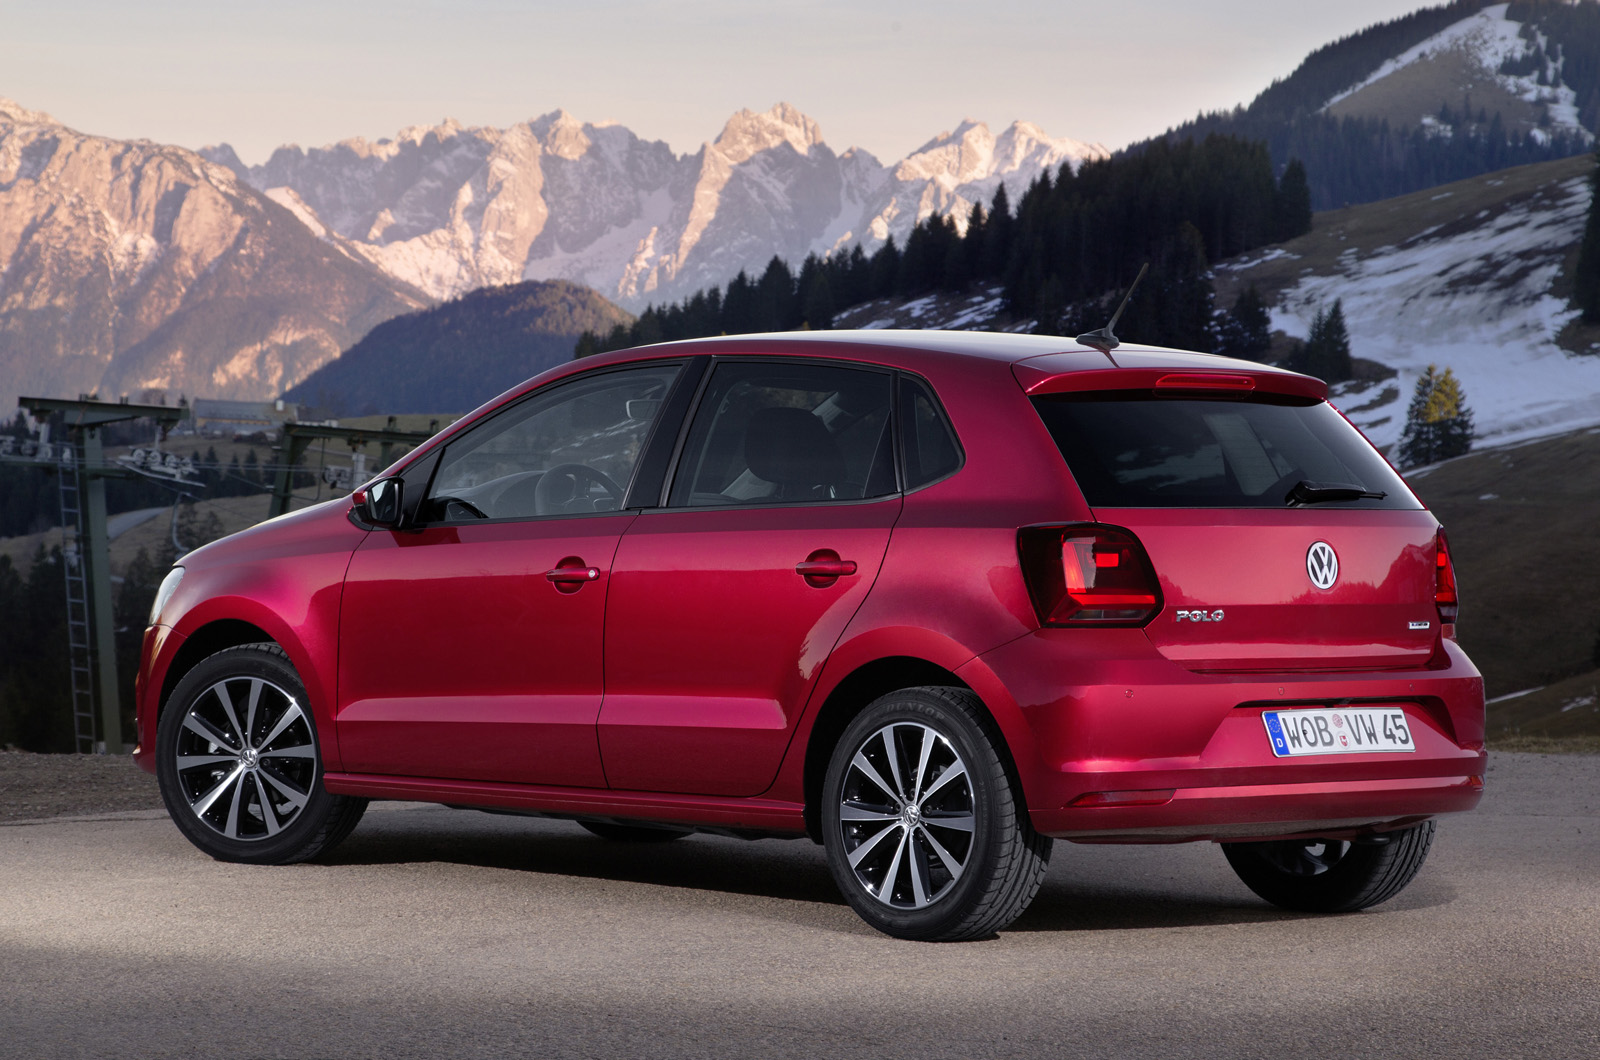 2014 Volkswagen Polo first drive